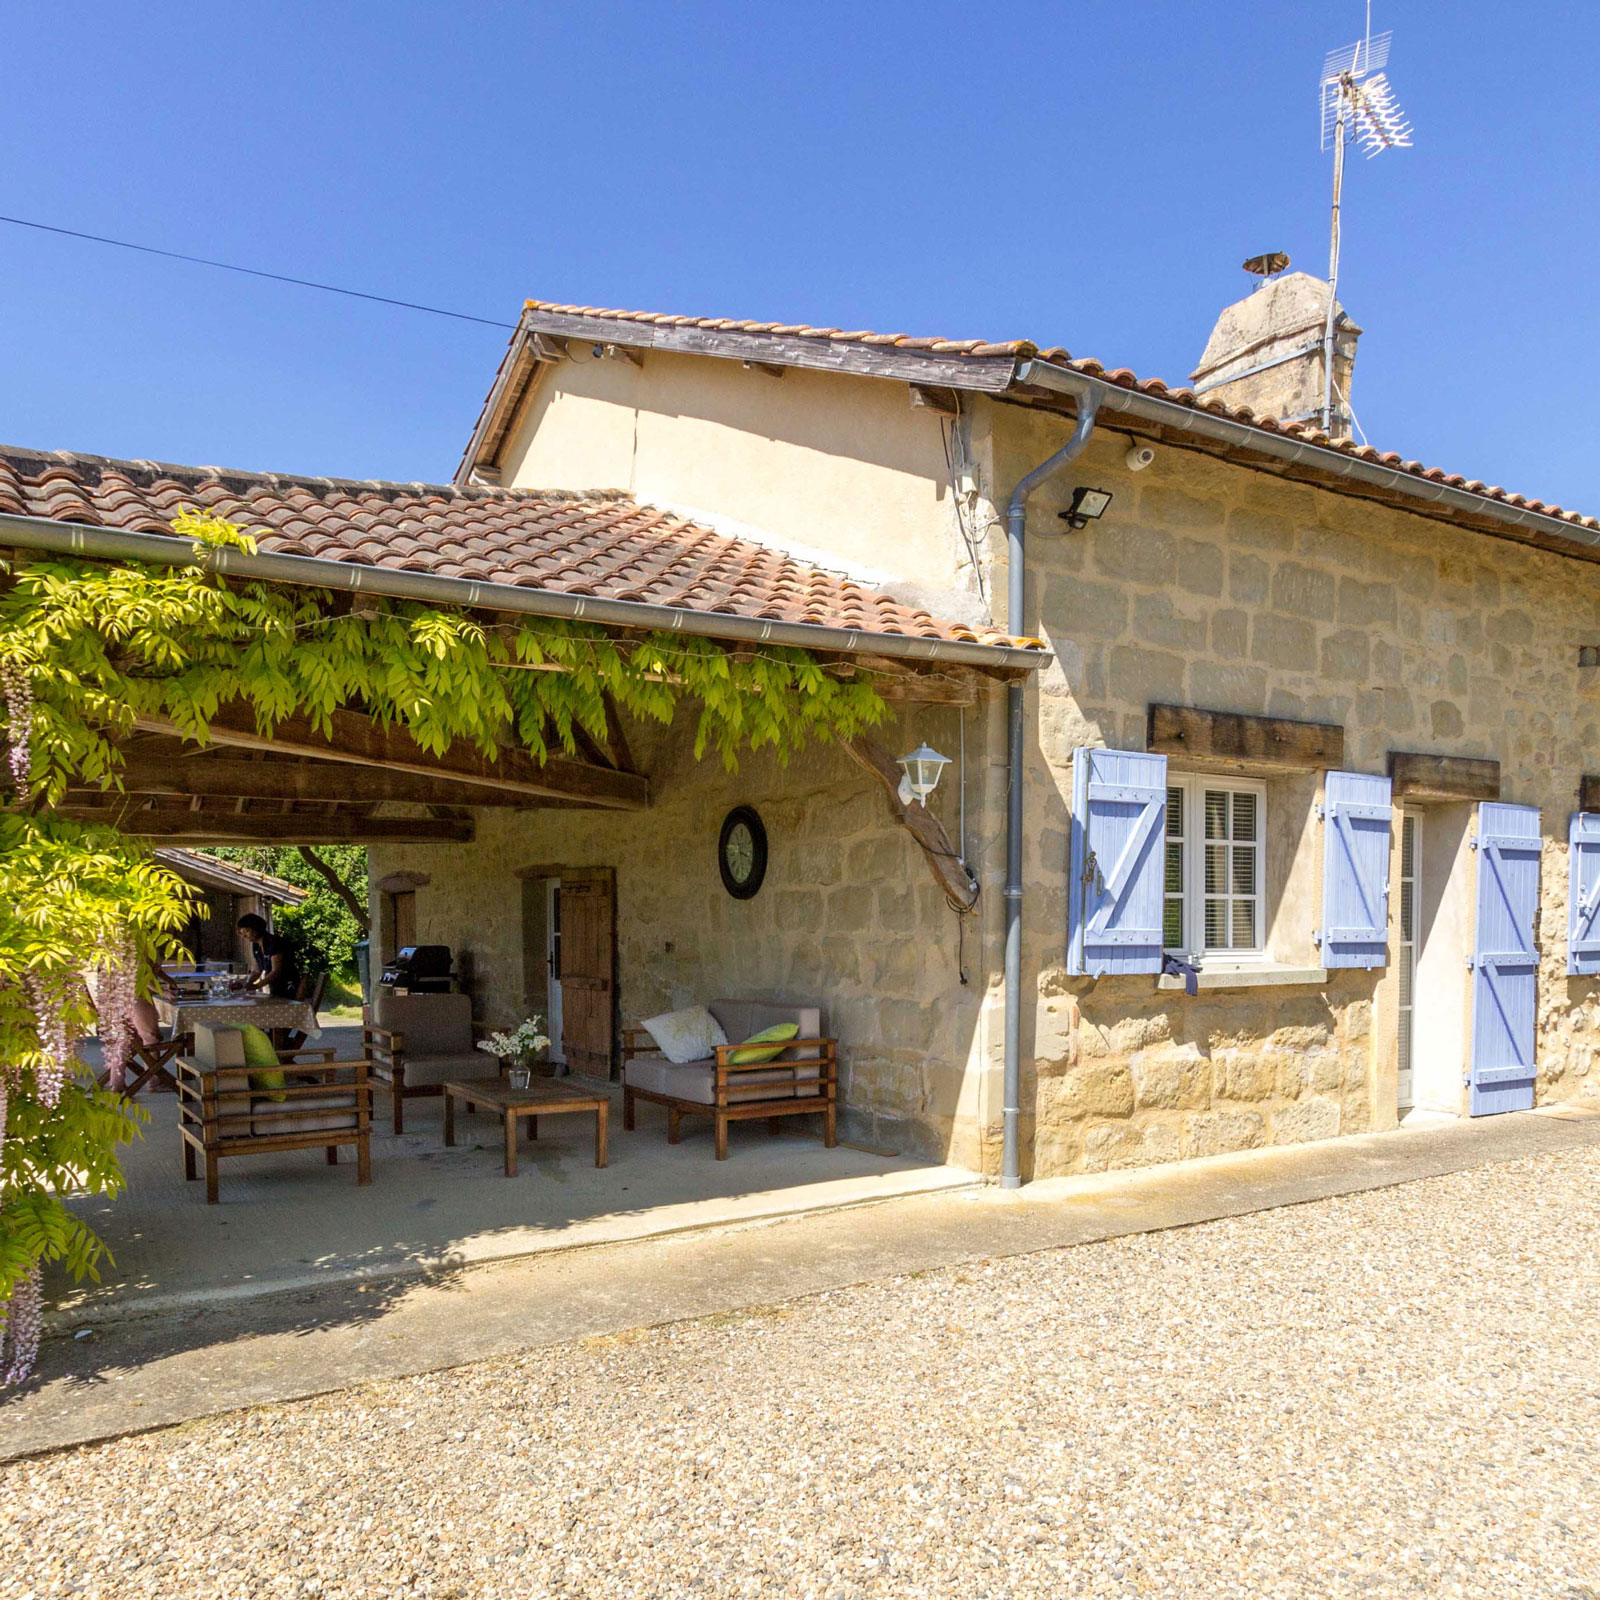 Le Verger holiday villa in SW France with a secure gated private pool near Eymet Bergerac south west france